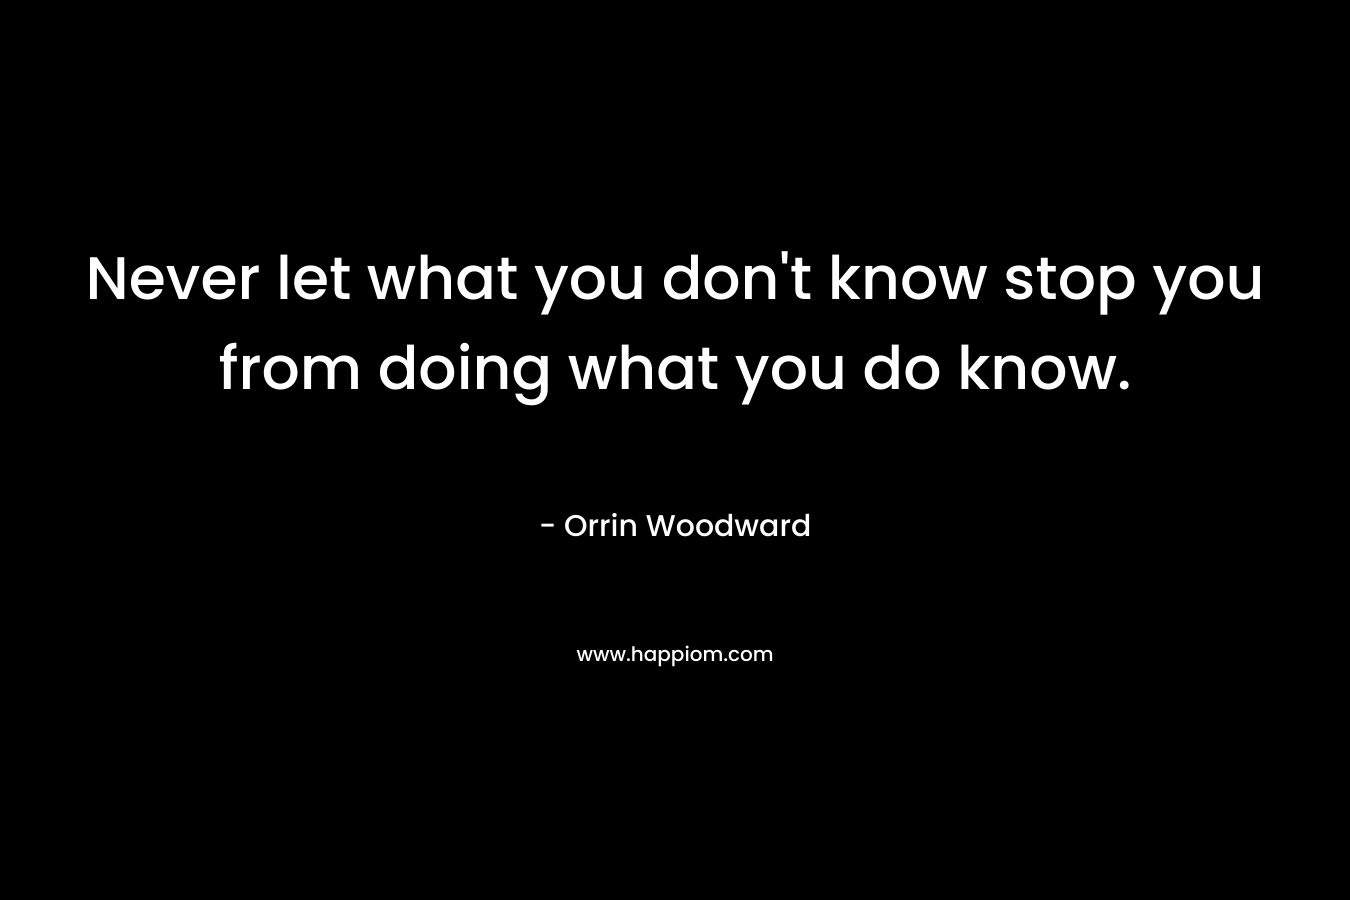 Never let what you don't know stop you from doing what you do know.